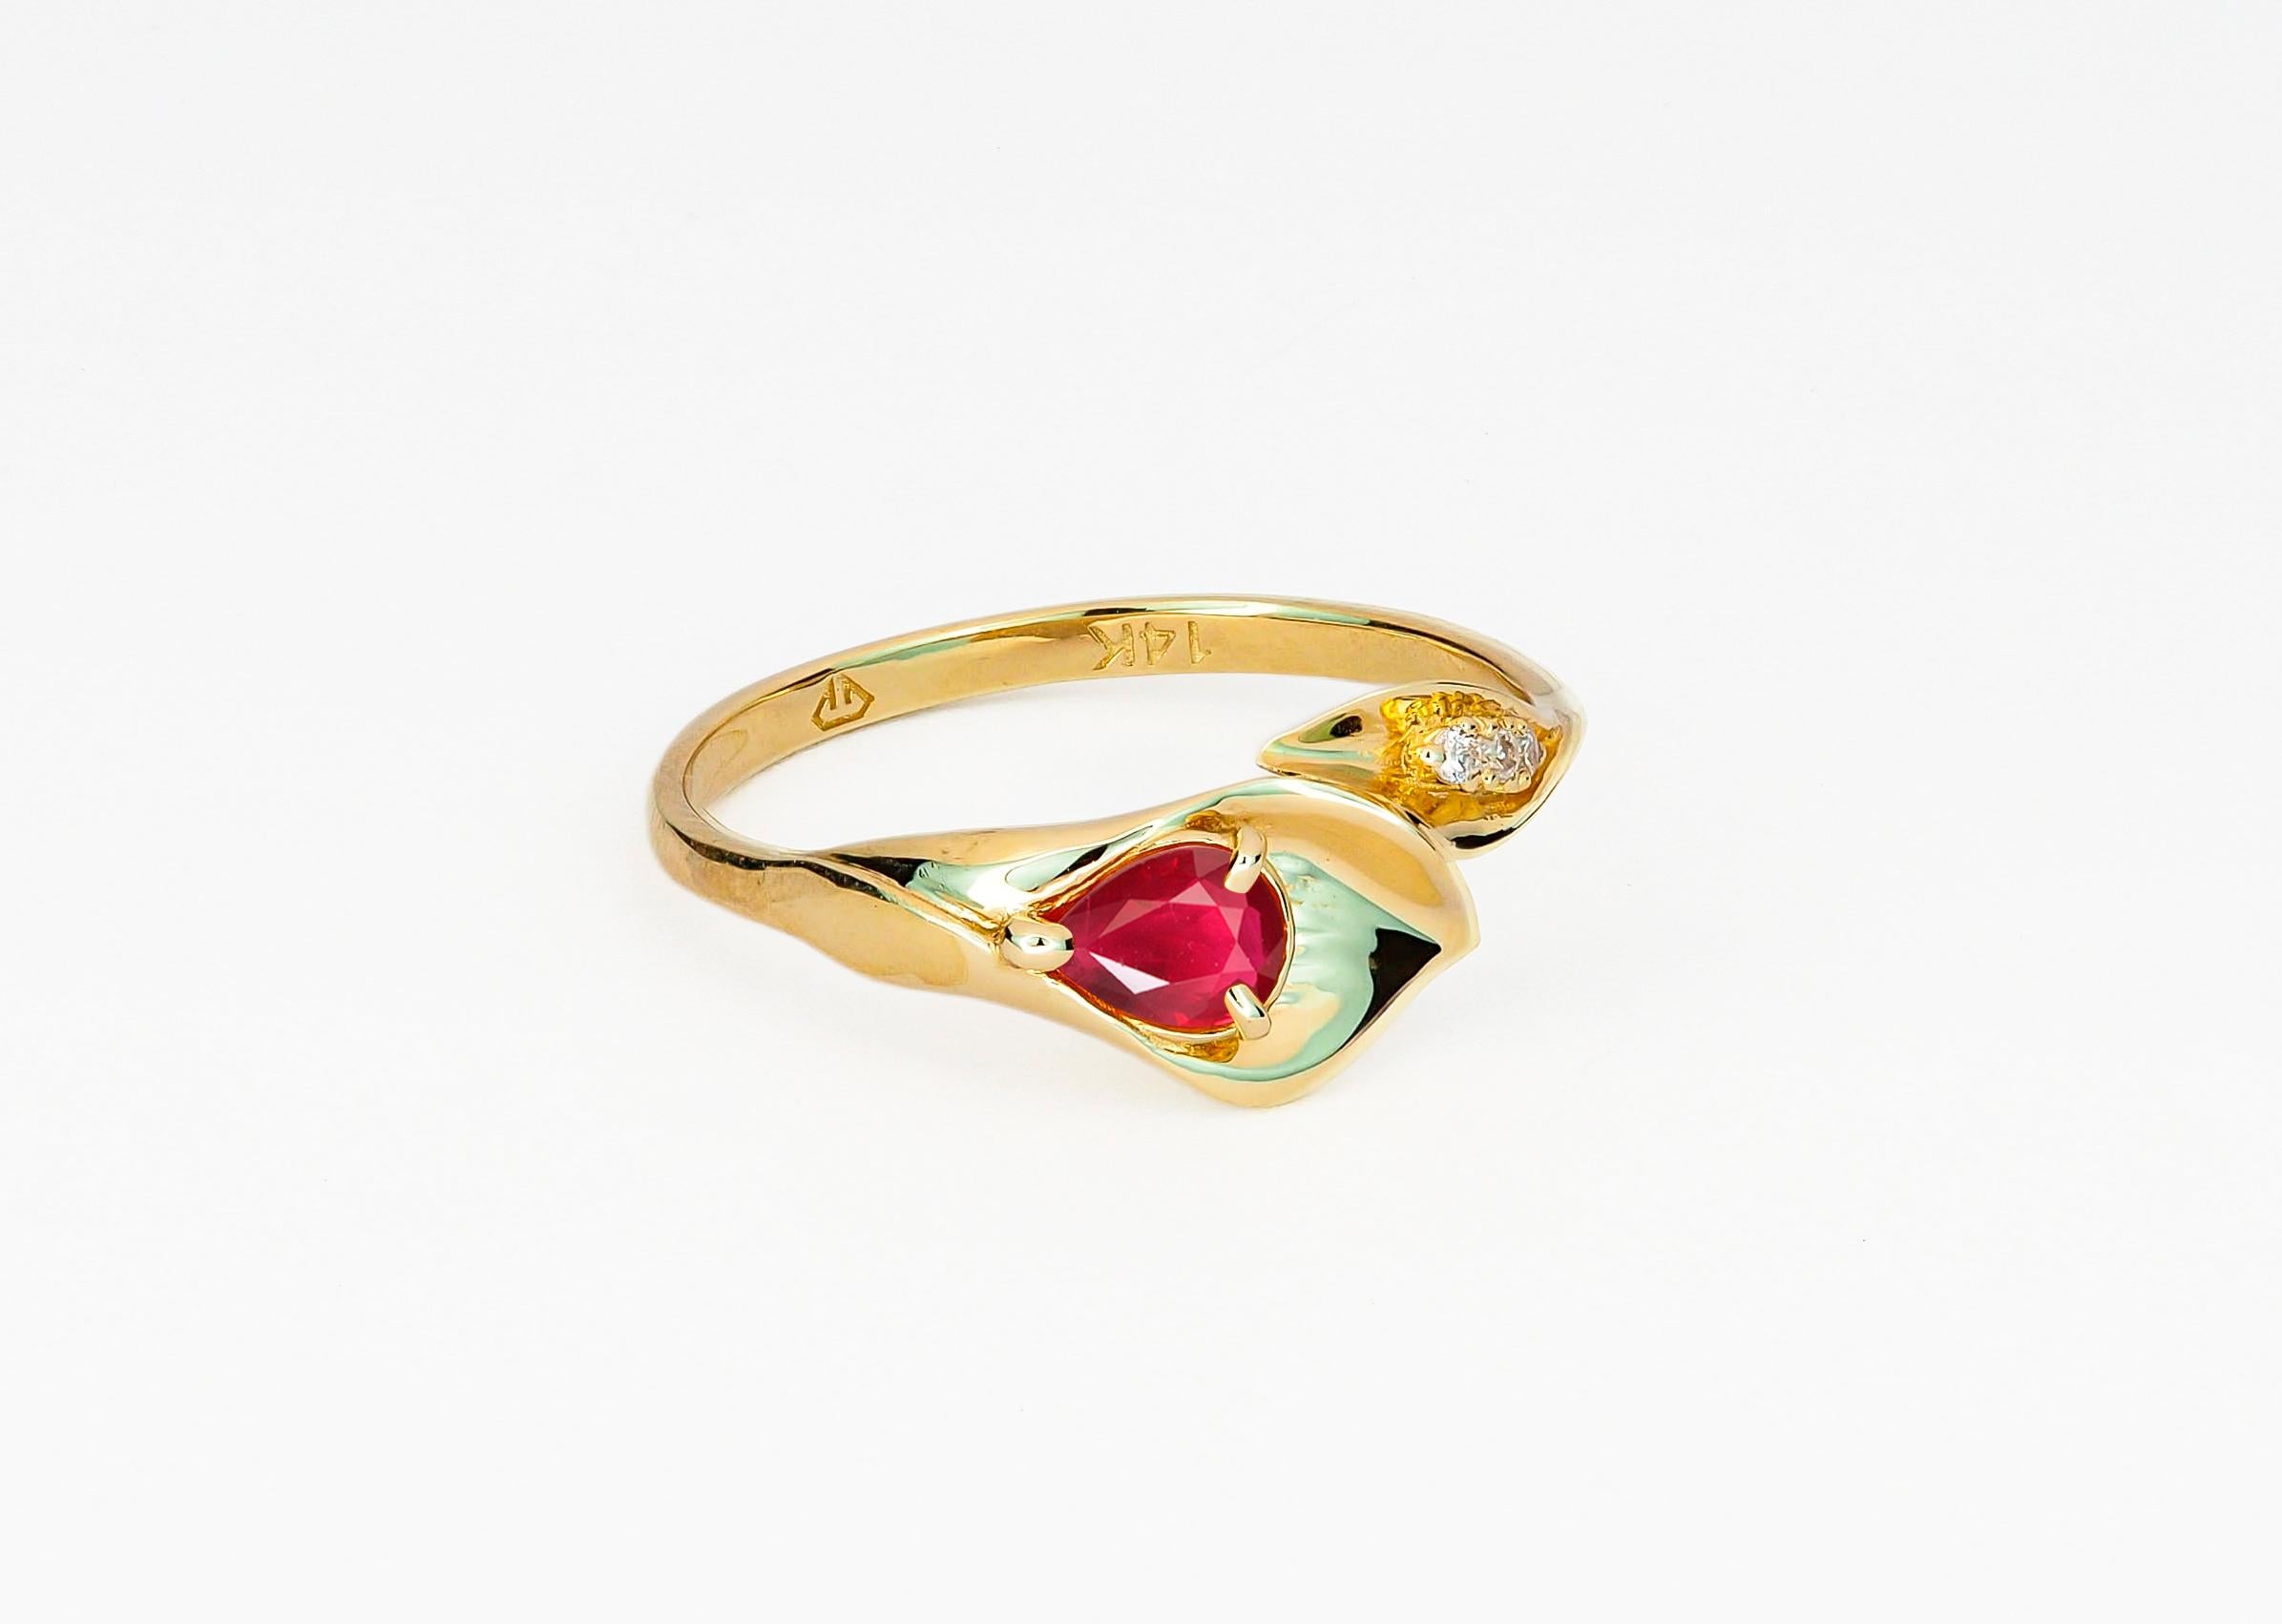 Lily calla gold ring. 
14 kt gold ring with ruby and diamonds. Pear ruby gold ring. Flower gold ring.Genuine ruby ring. Red ruby ring.

Metal: 14k gold
Weight: 1.8 g. depends from size.

Set with ruby, pear cut, 0.70 ct., red color
Clarity: